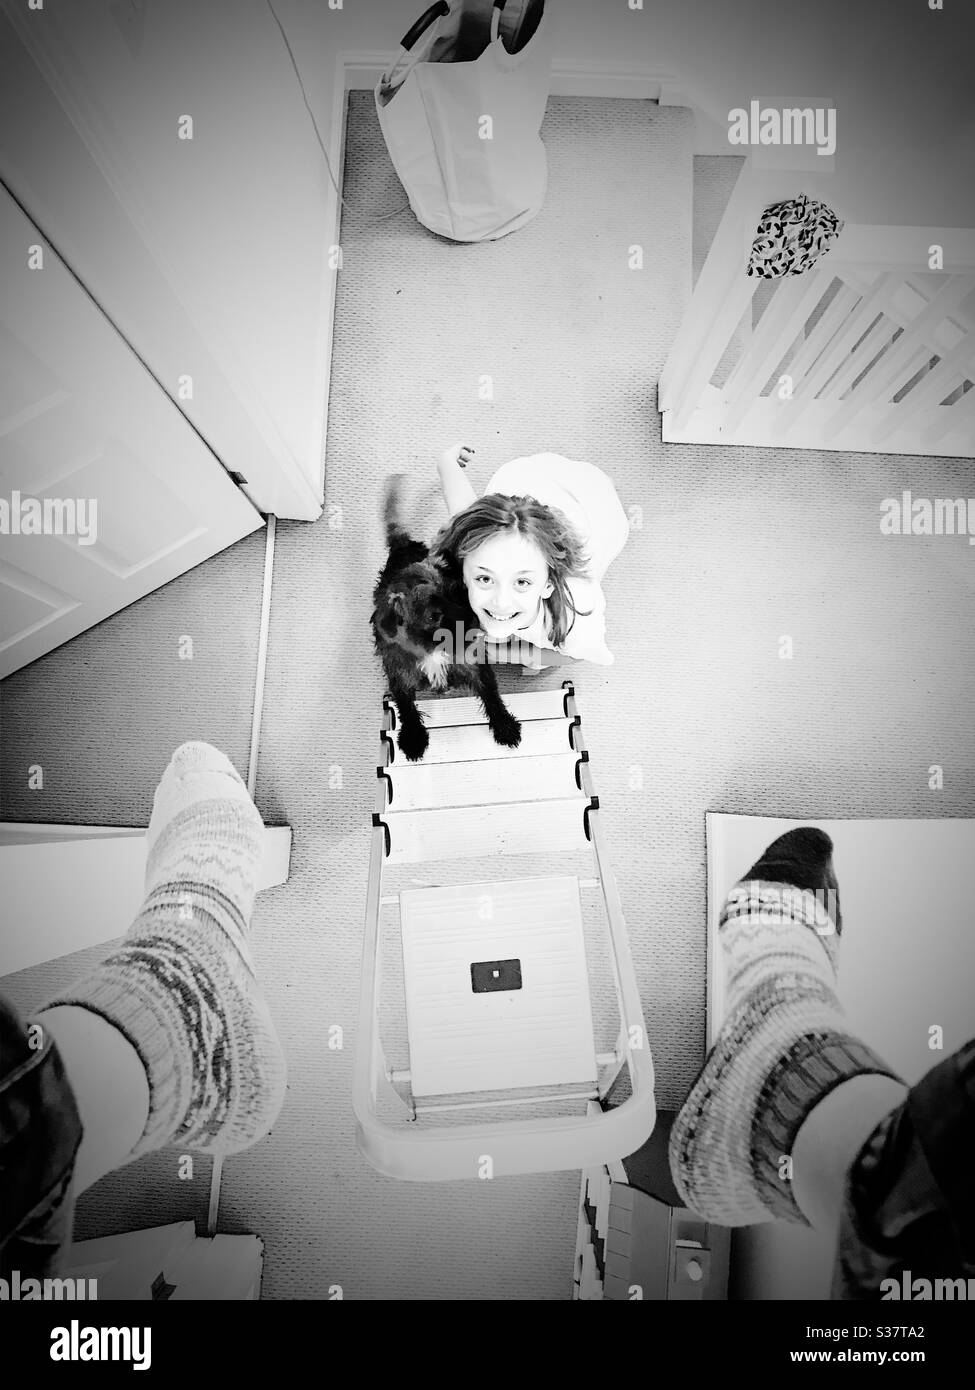 Looking down from an attic. Family life Stock Photo